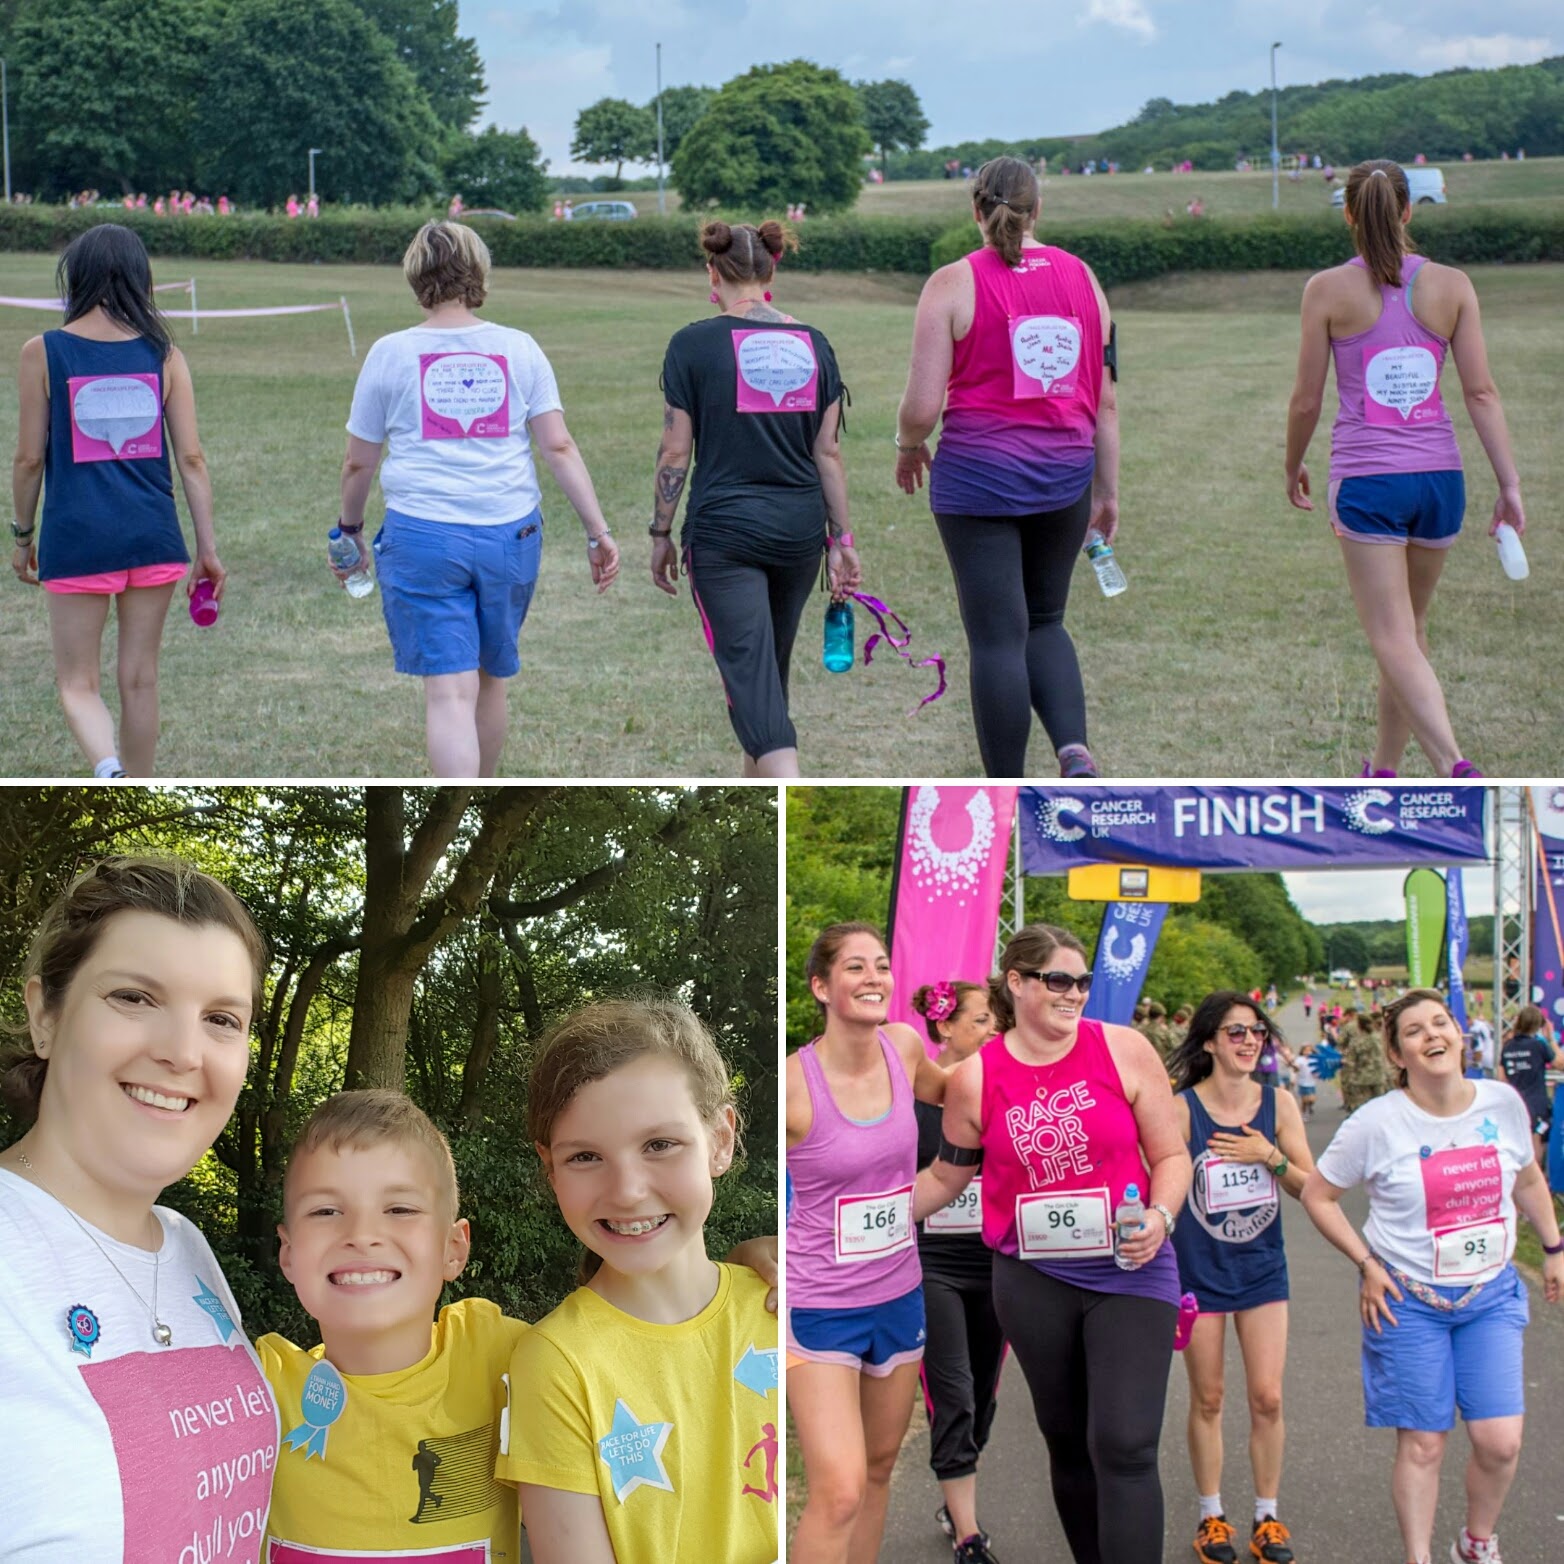 Race For Life 2017